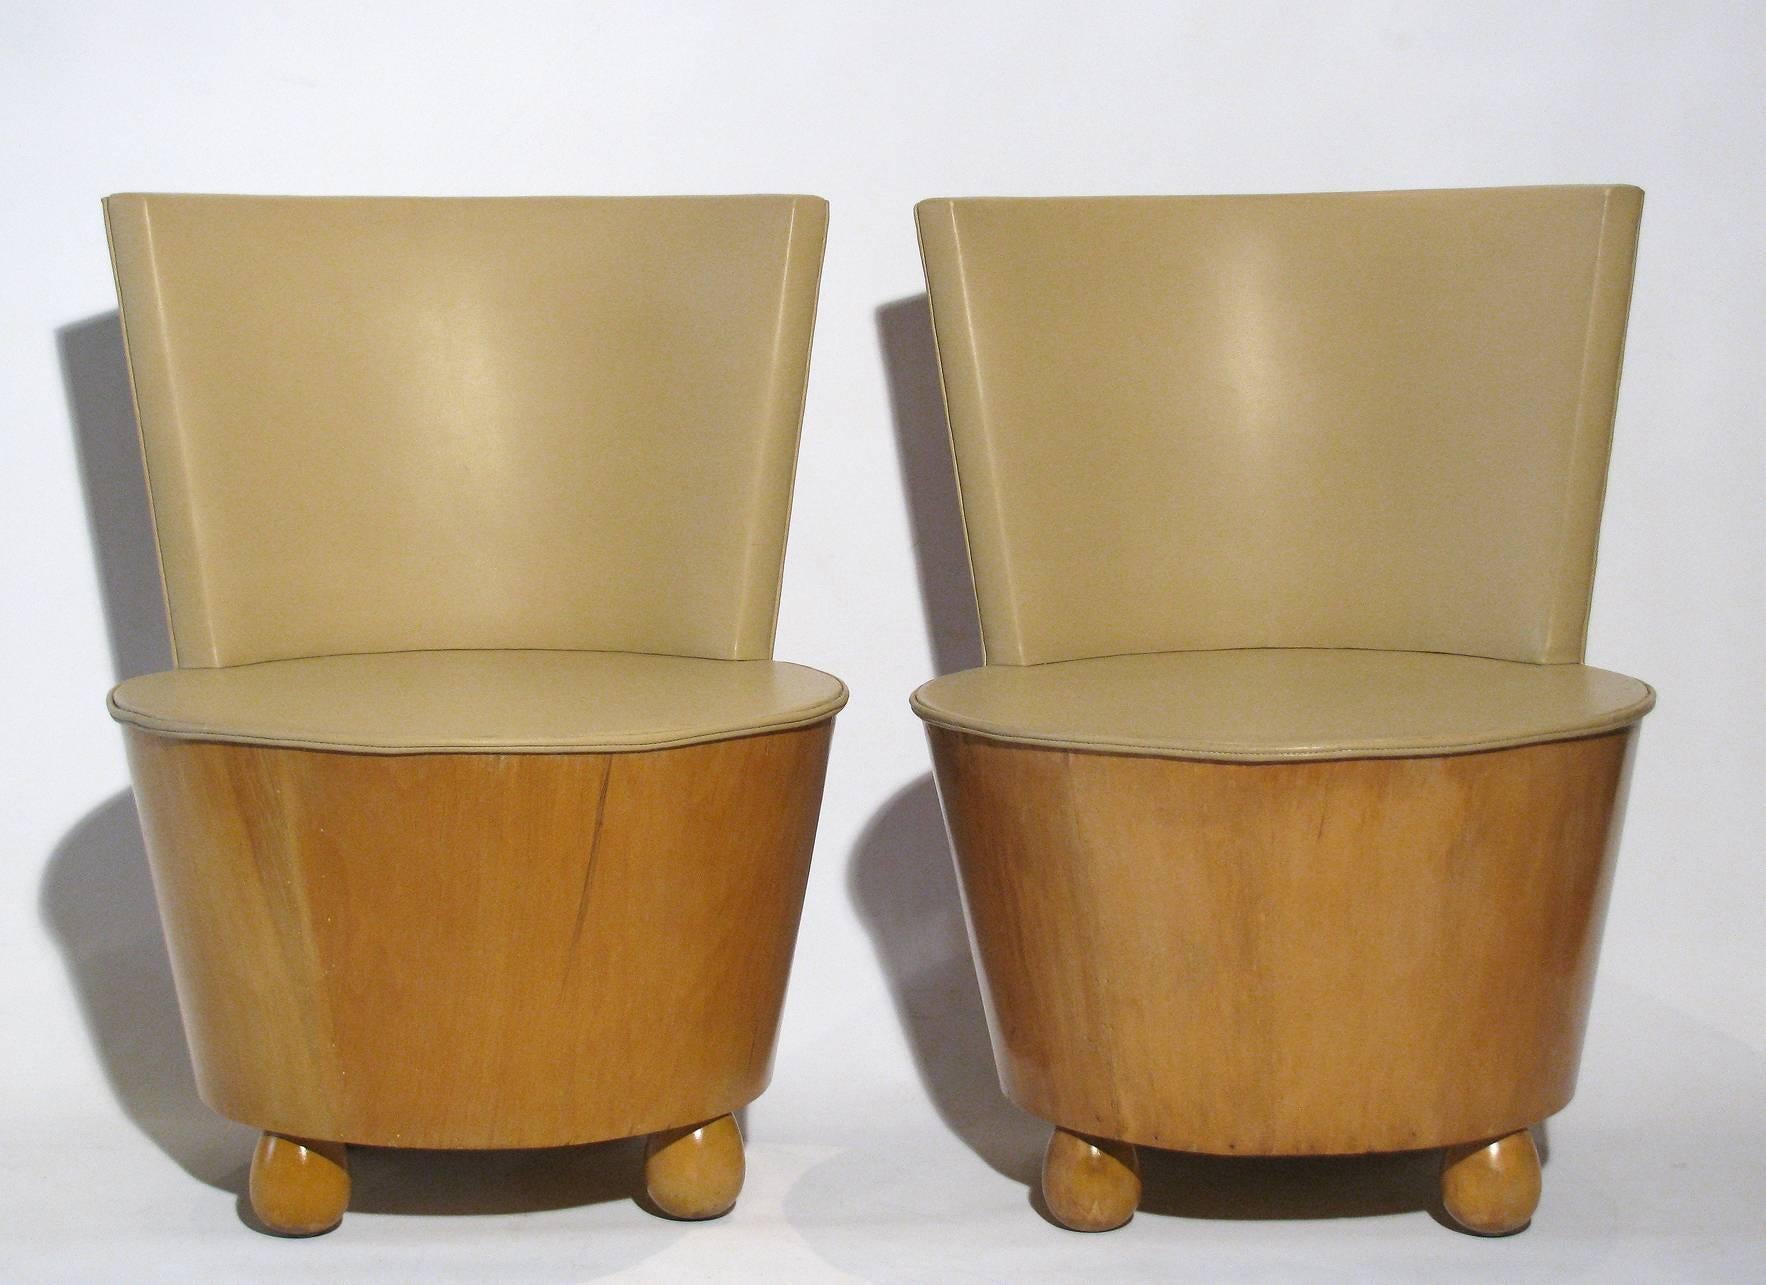 A chic pair of Art Deco style tub chairs attributed to Elsie de Wolfe. Seat height measures 14 inches without cushion.